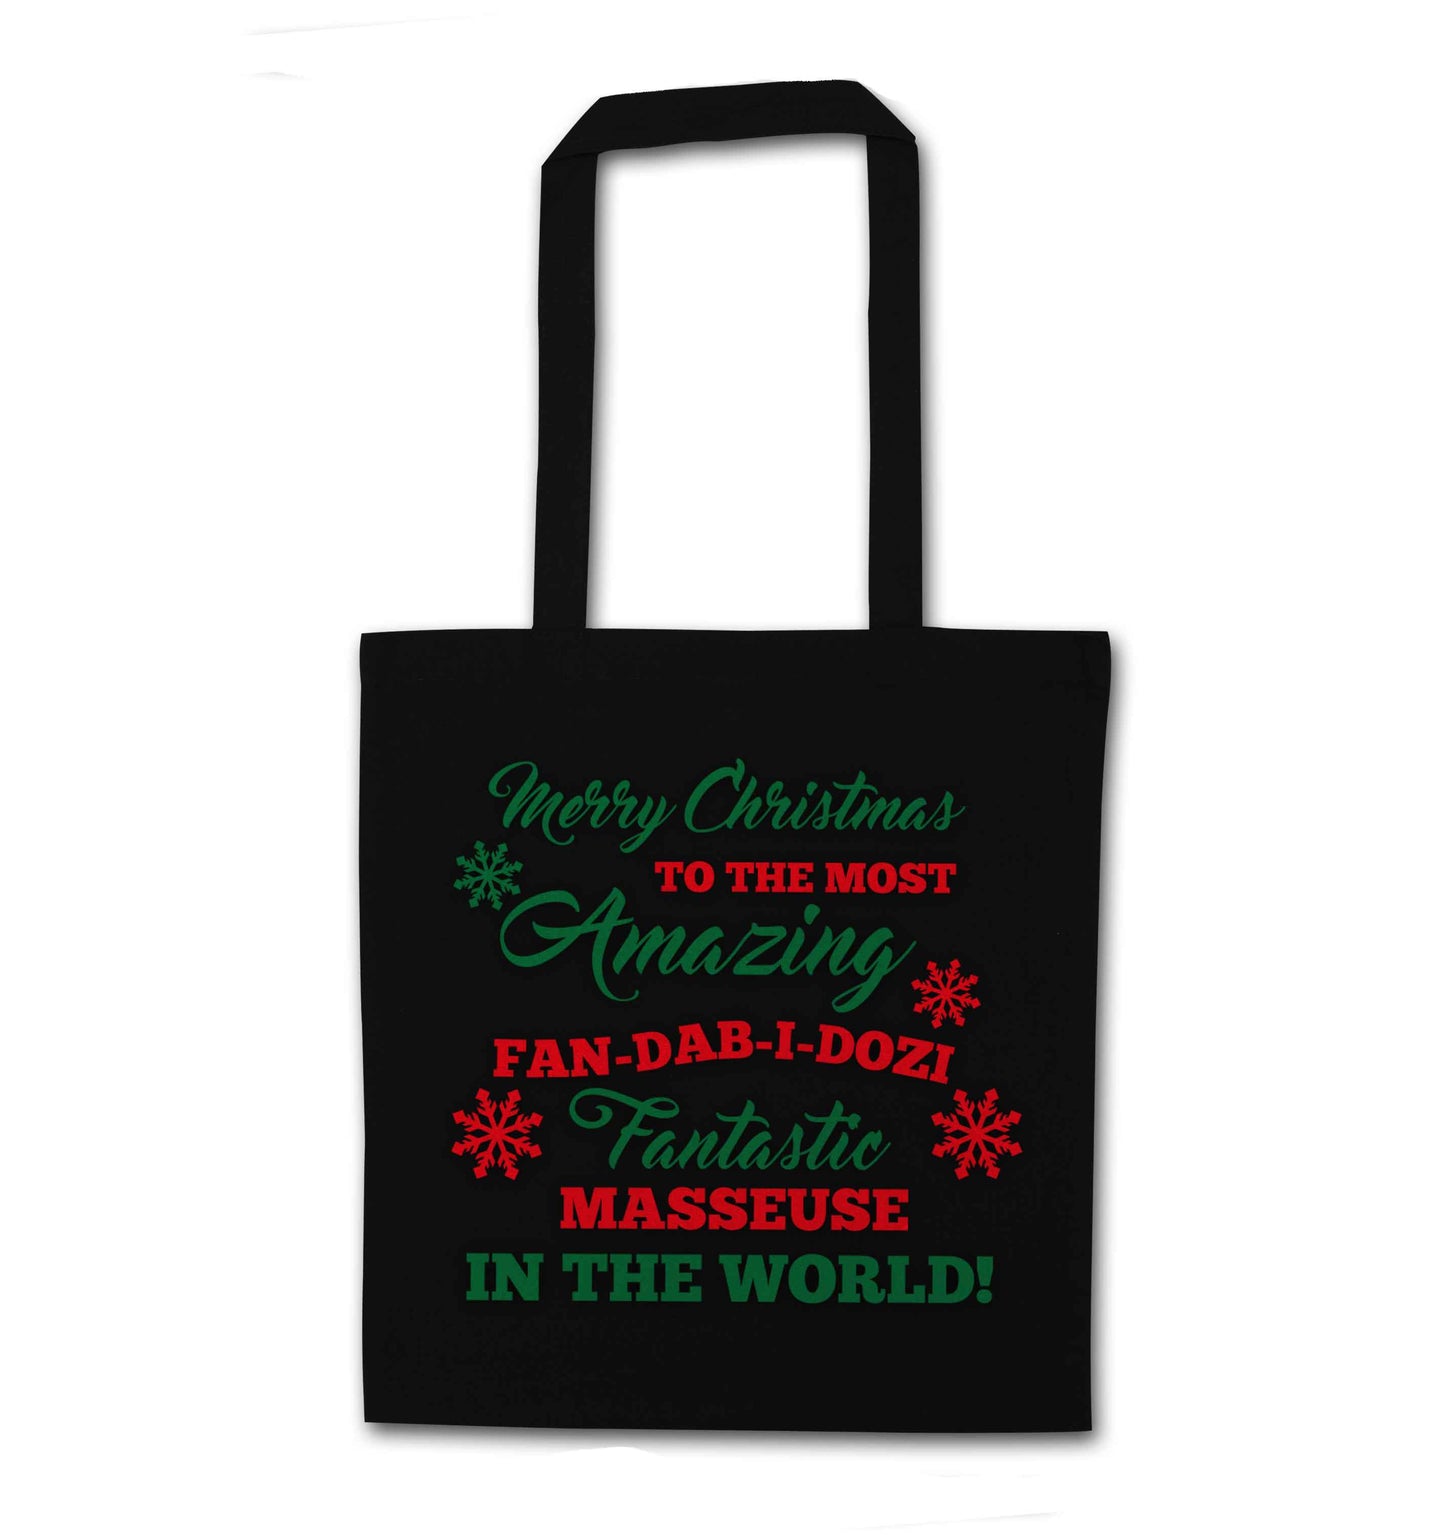 Merry Christmas to the most amazing fan-dab-i-dozi fantasic masseuse in the world black tote bag